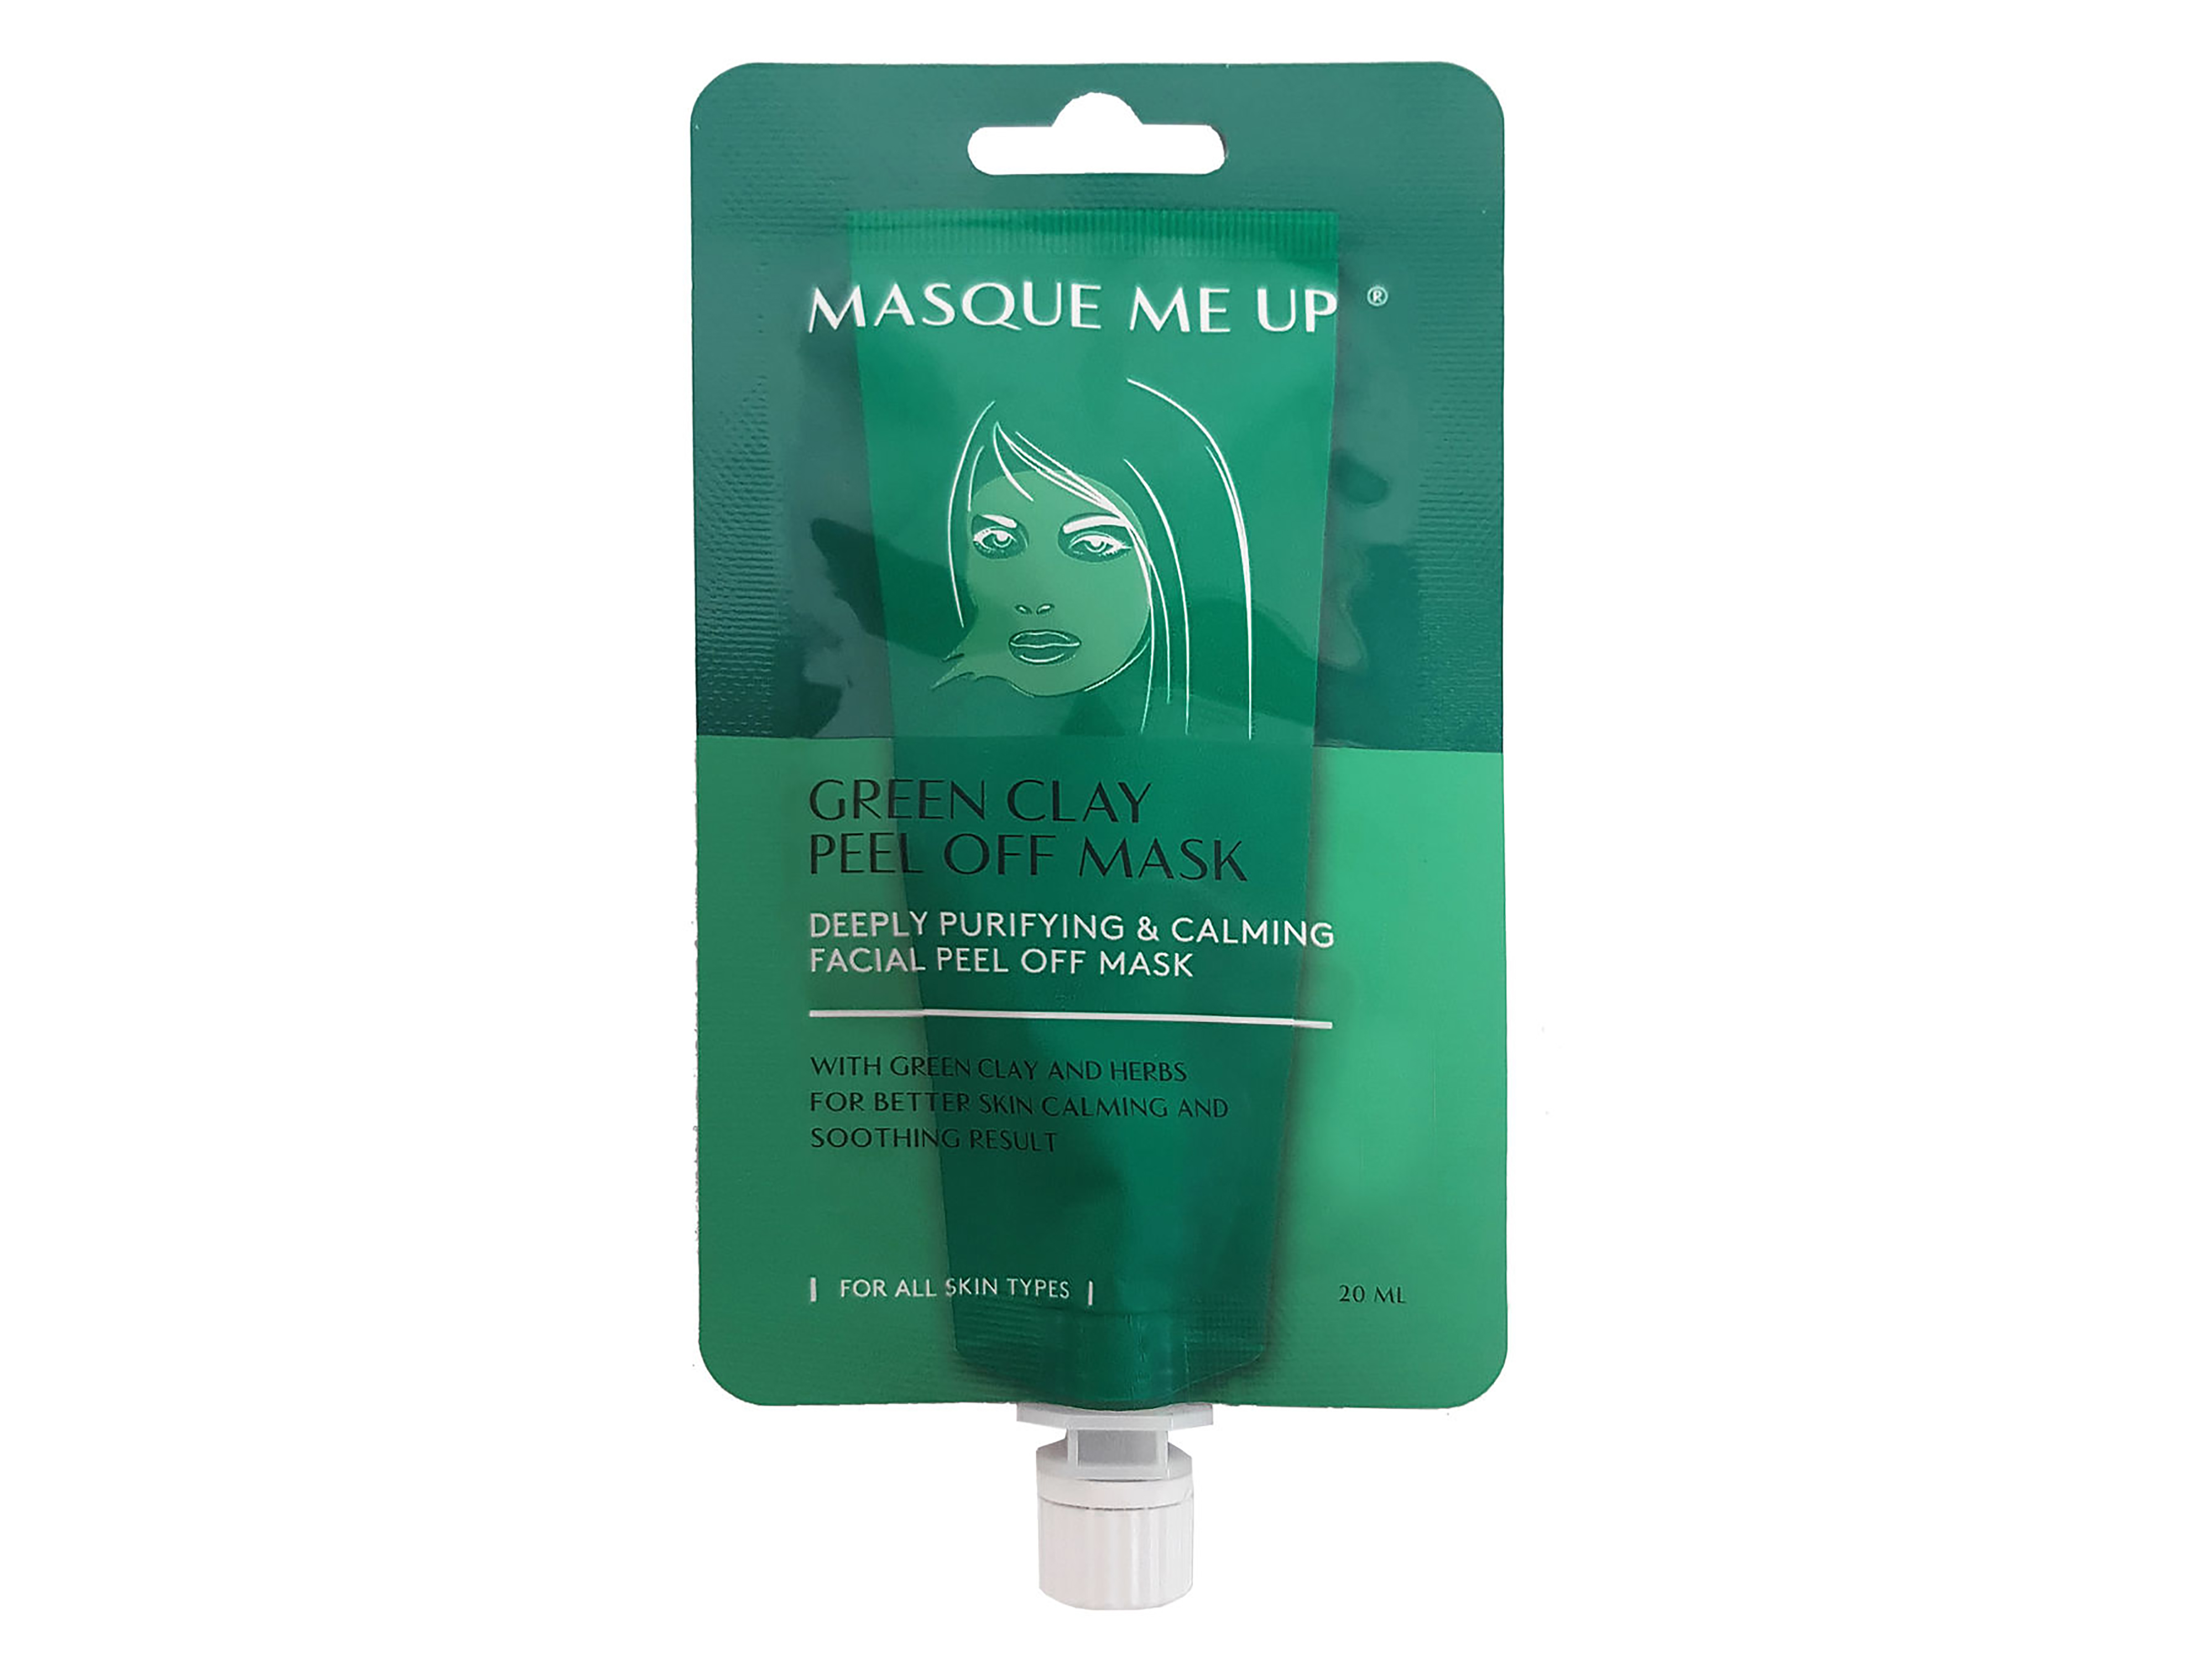 Masque Me Up Green Clay Peel Off Mask, 20 ml